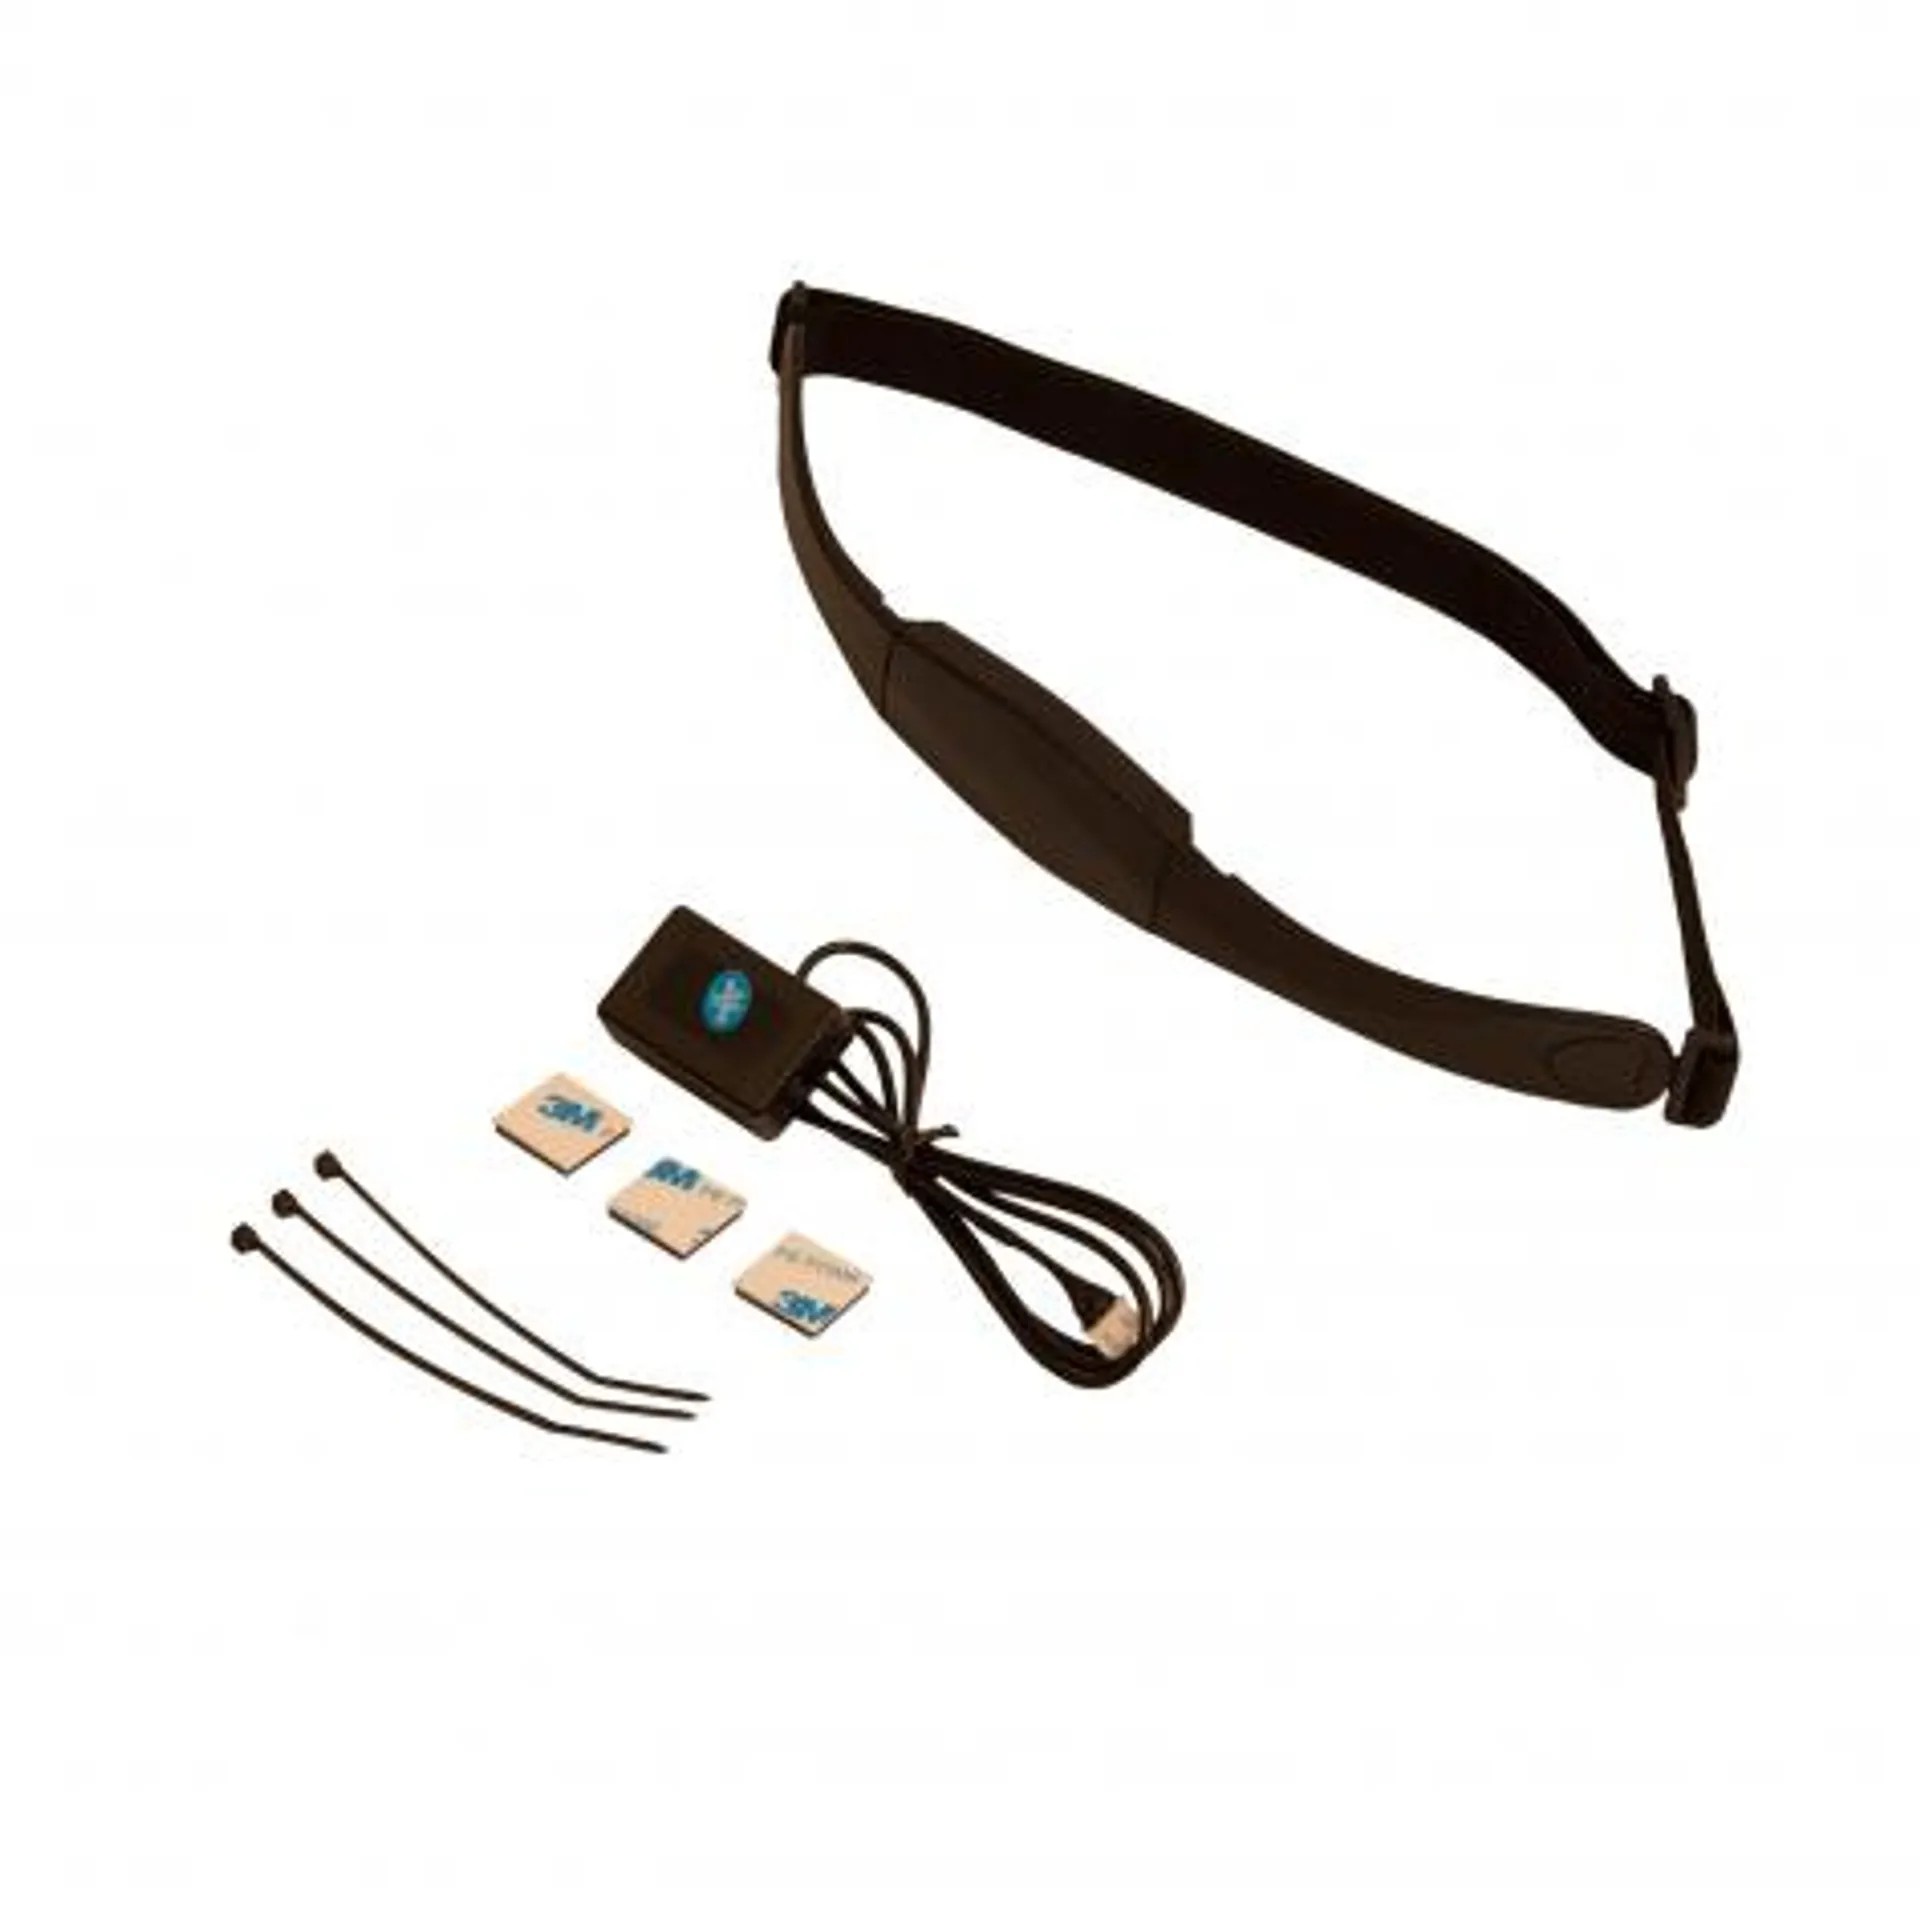 Body Power Heart Rate Kit for R200 & R300 Rowers (Transmitter/Strap included)